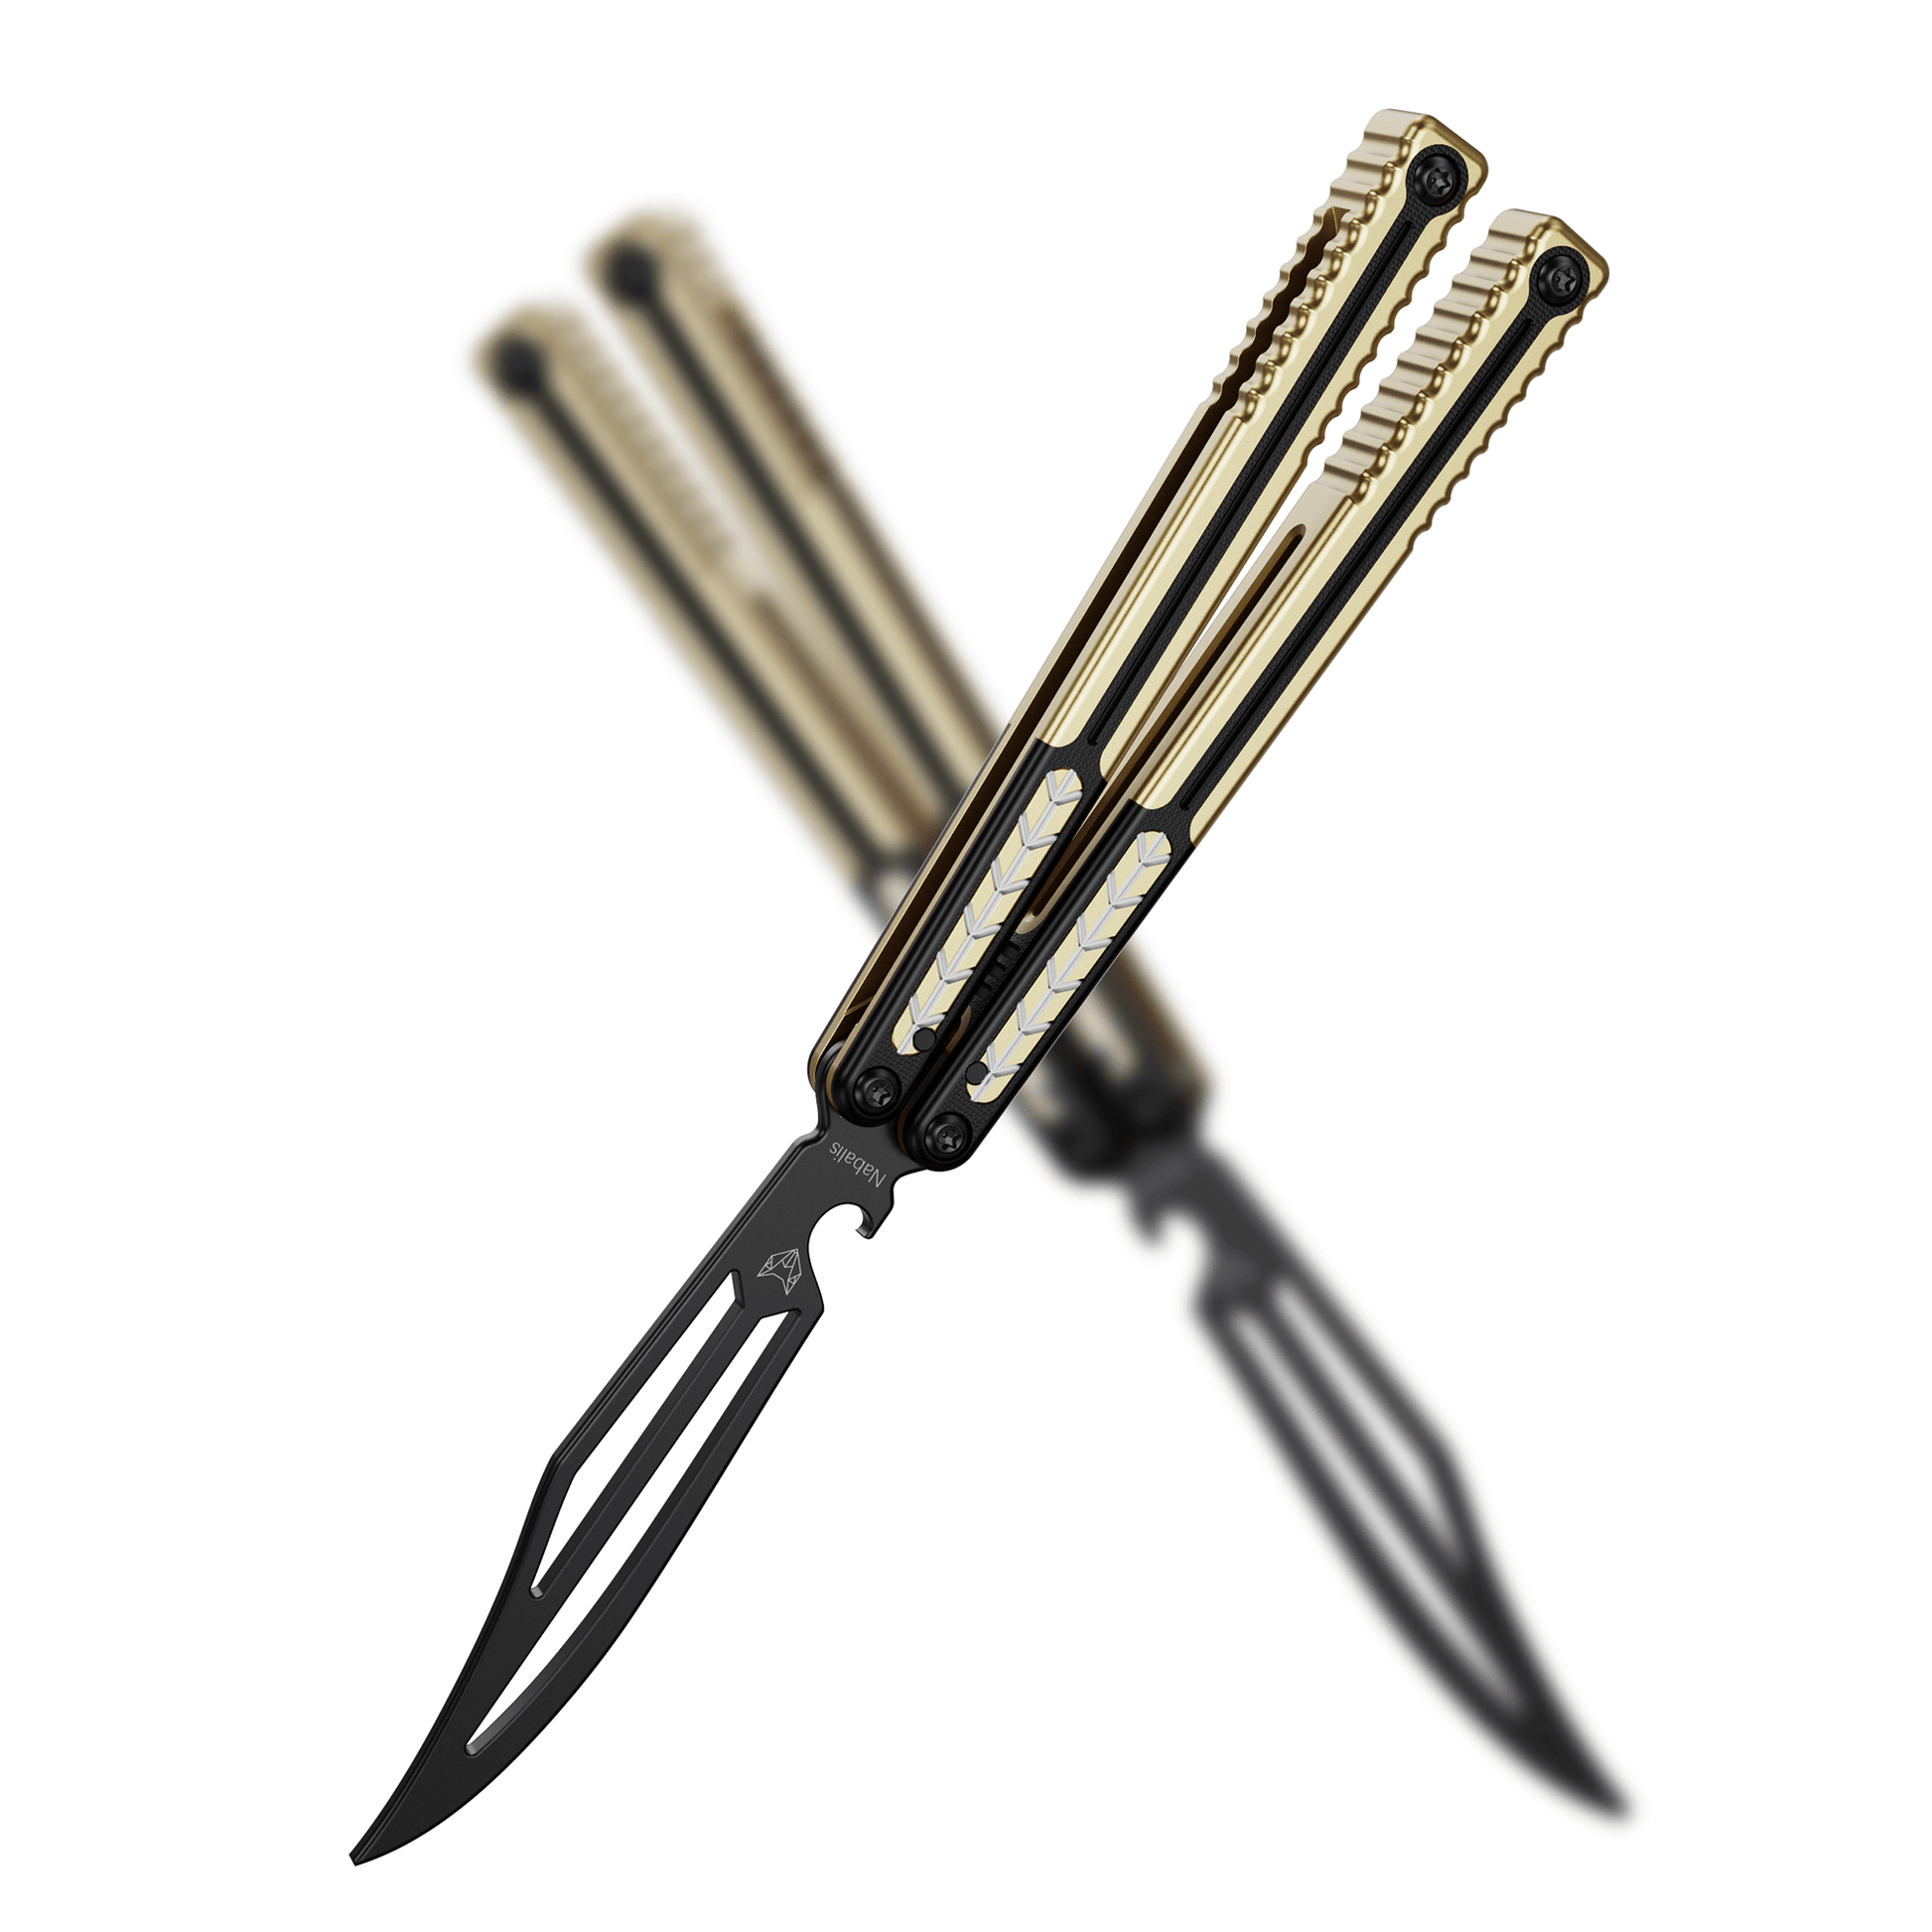 Nabalis Vulp Pro Balisong Butterfly Knife Trainer-Gold